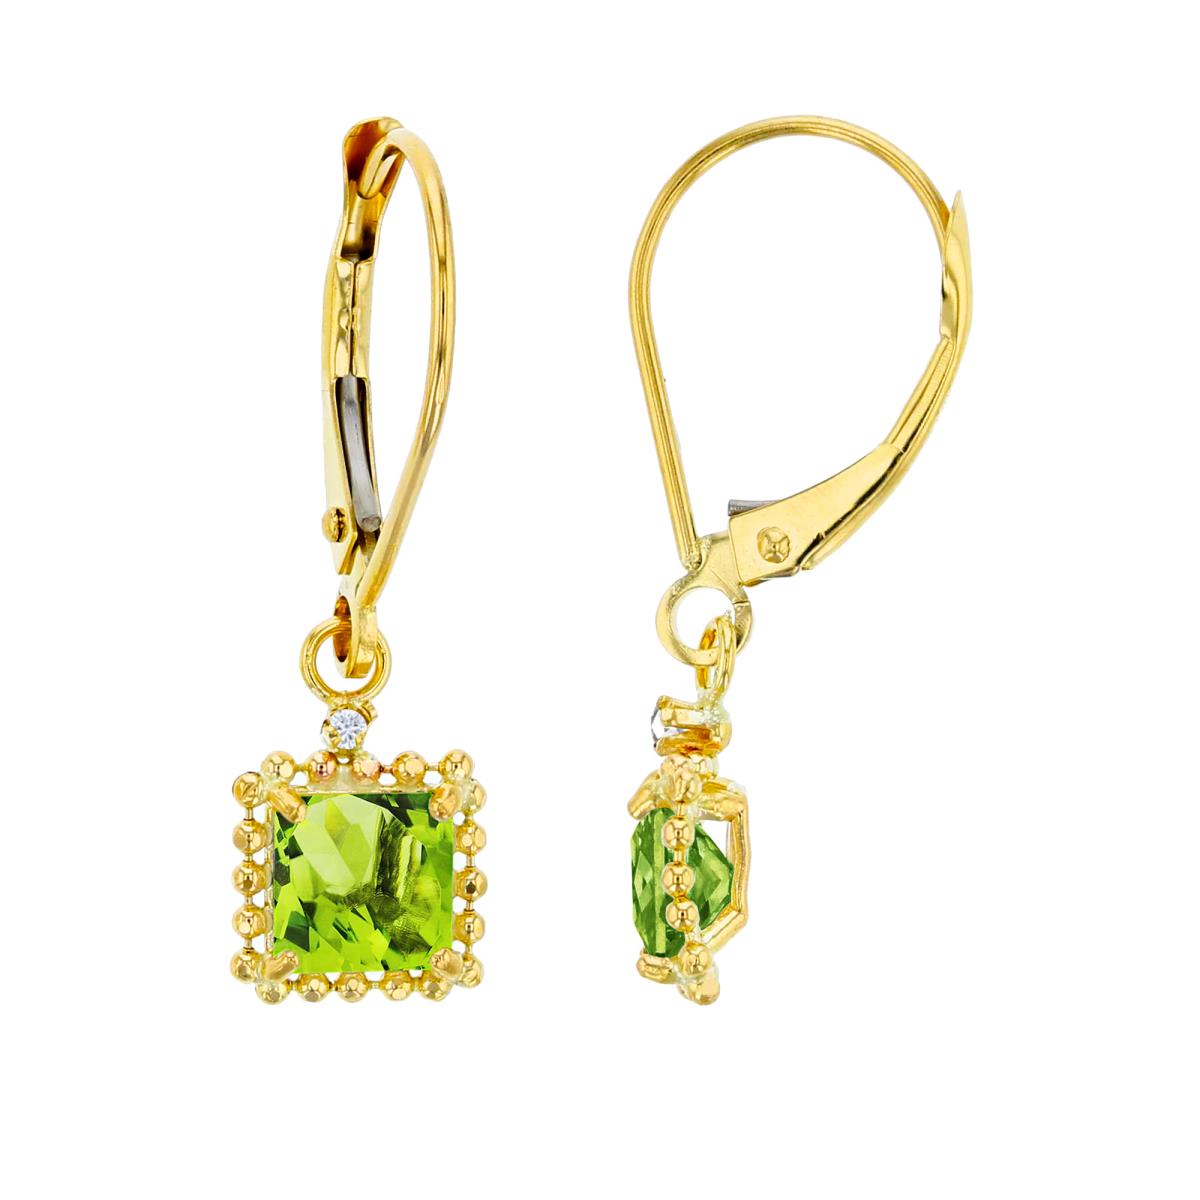 10K Yellow Gold 1.25mm Rd Created White Sapphire & 5mm Sq Peridot Bead Frame Drop Lever-Back Earring